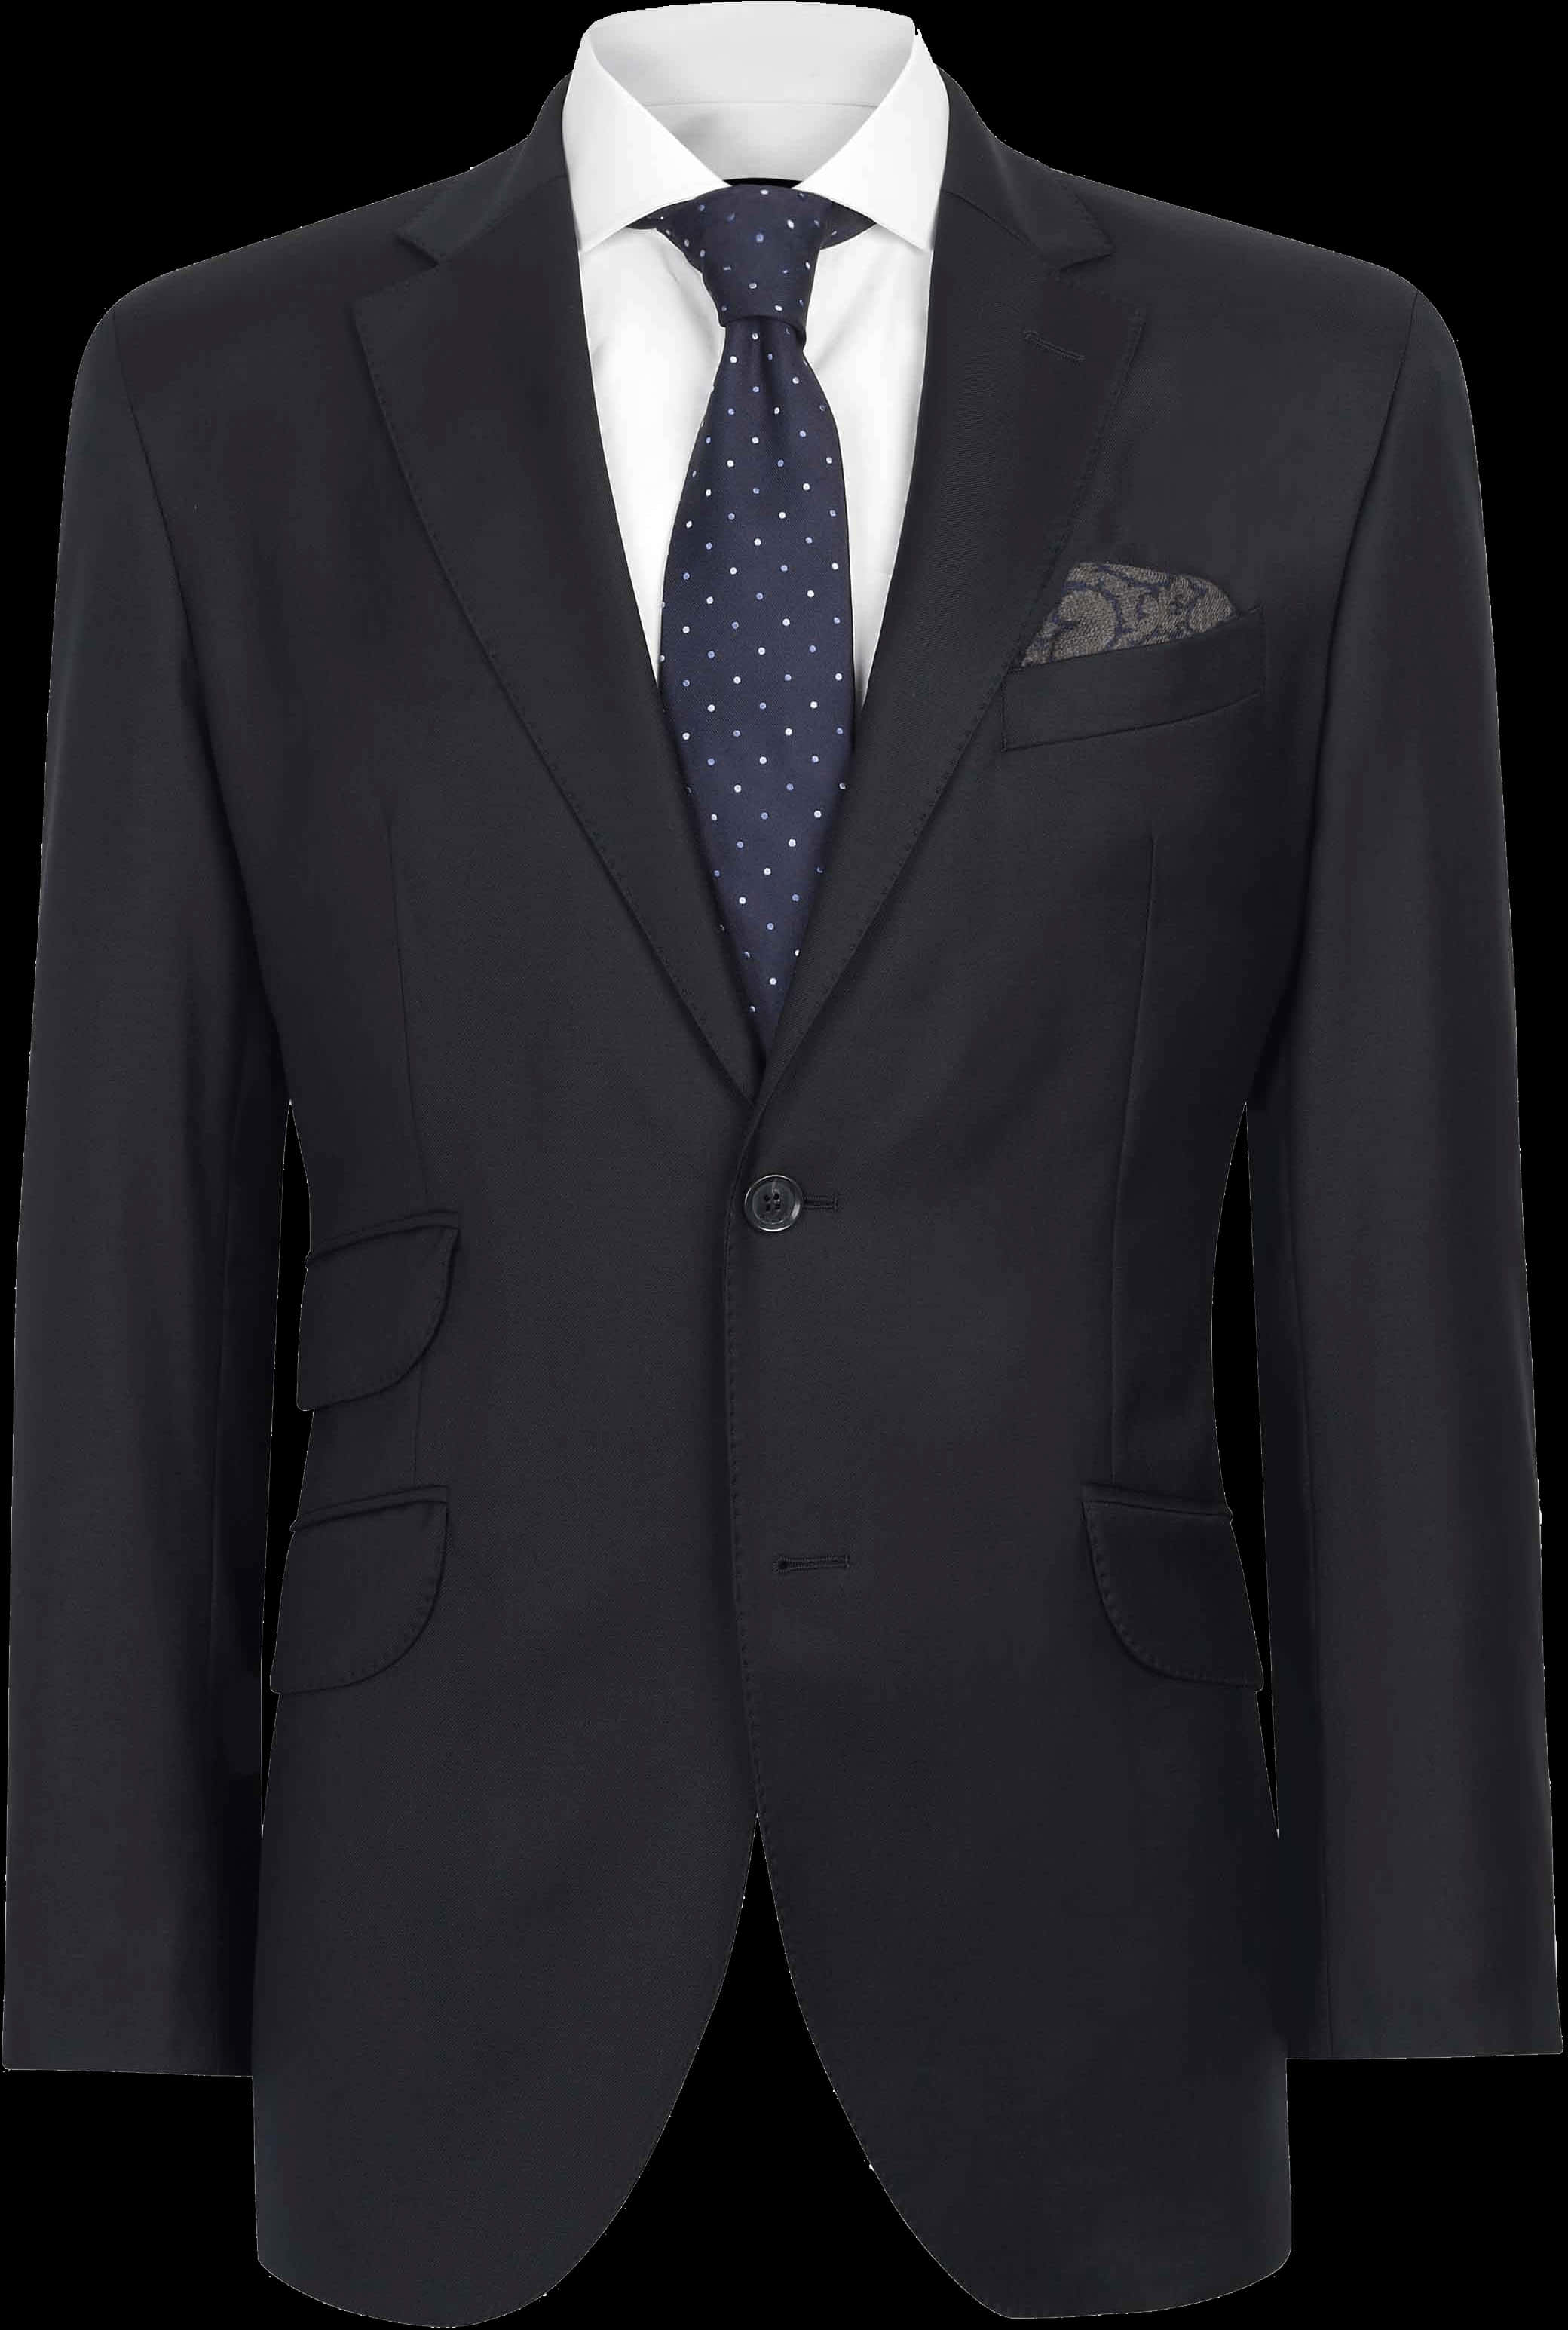 Classic Navy Suit Jacketwith White Shirtand Polka Dot Tie PNG